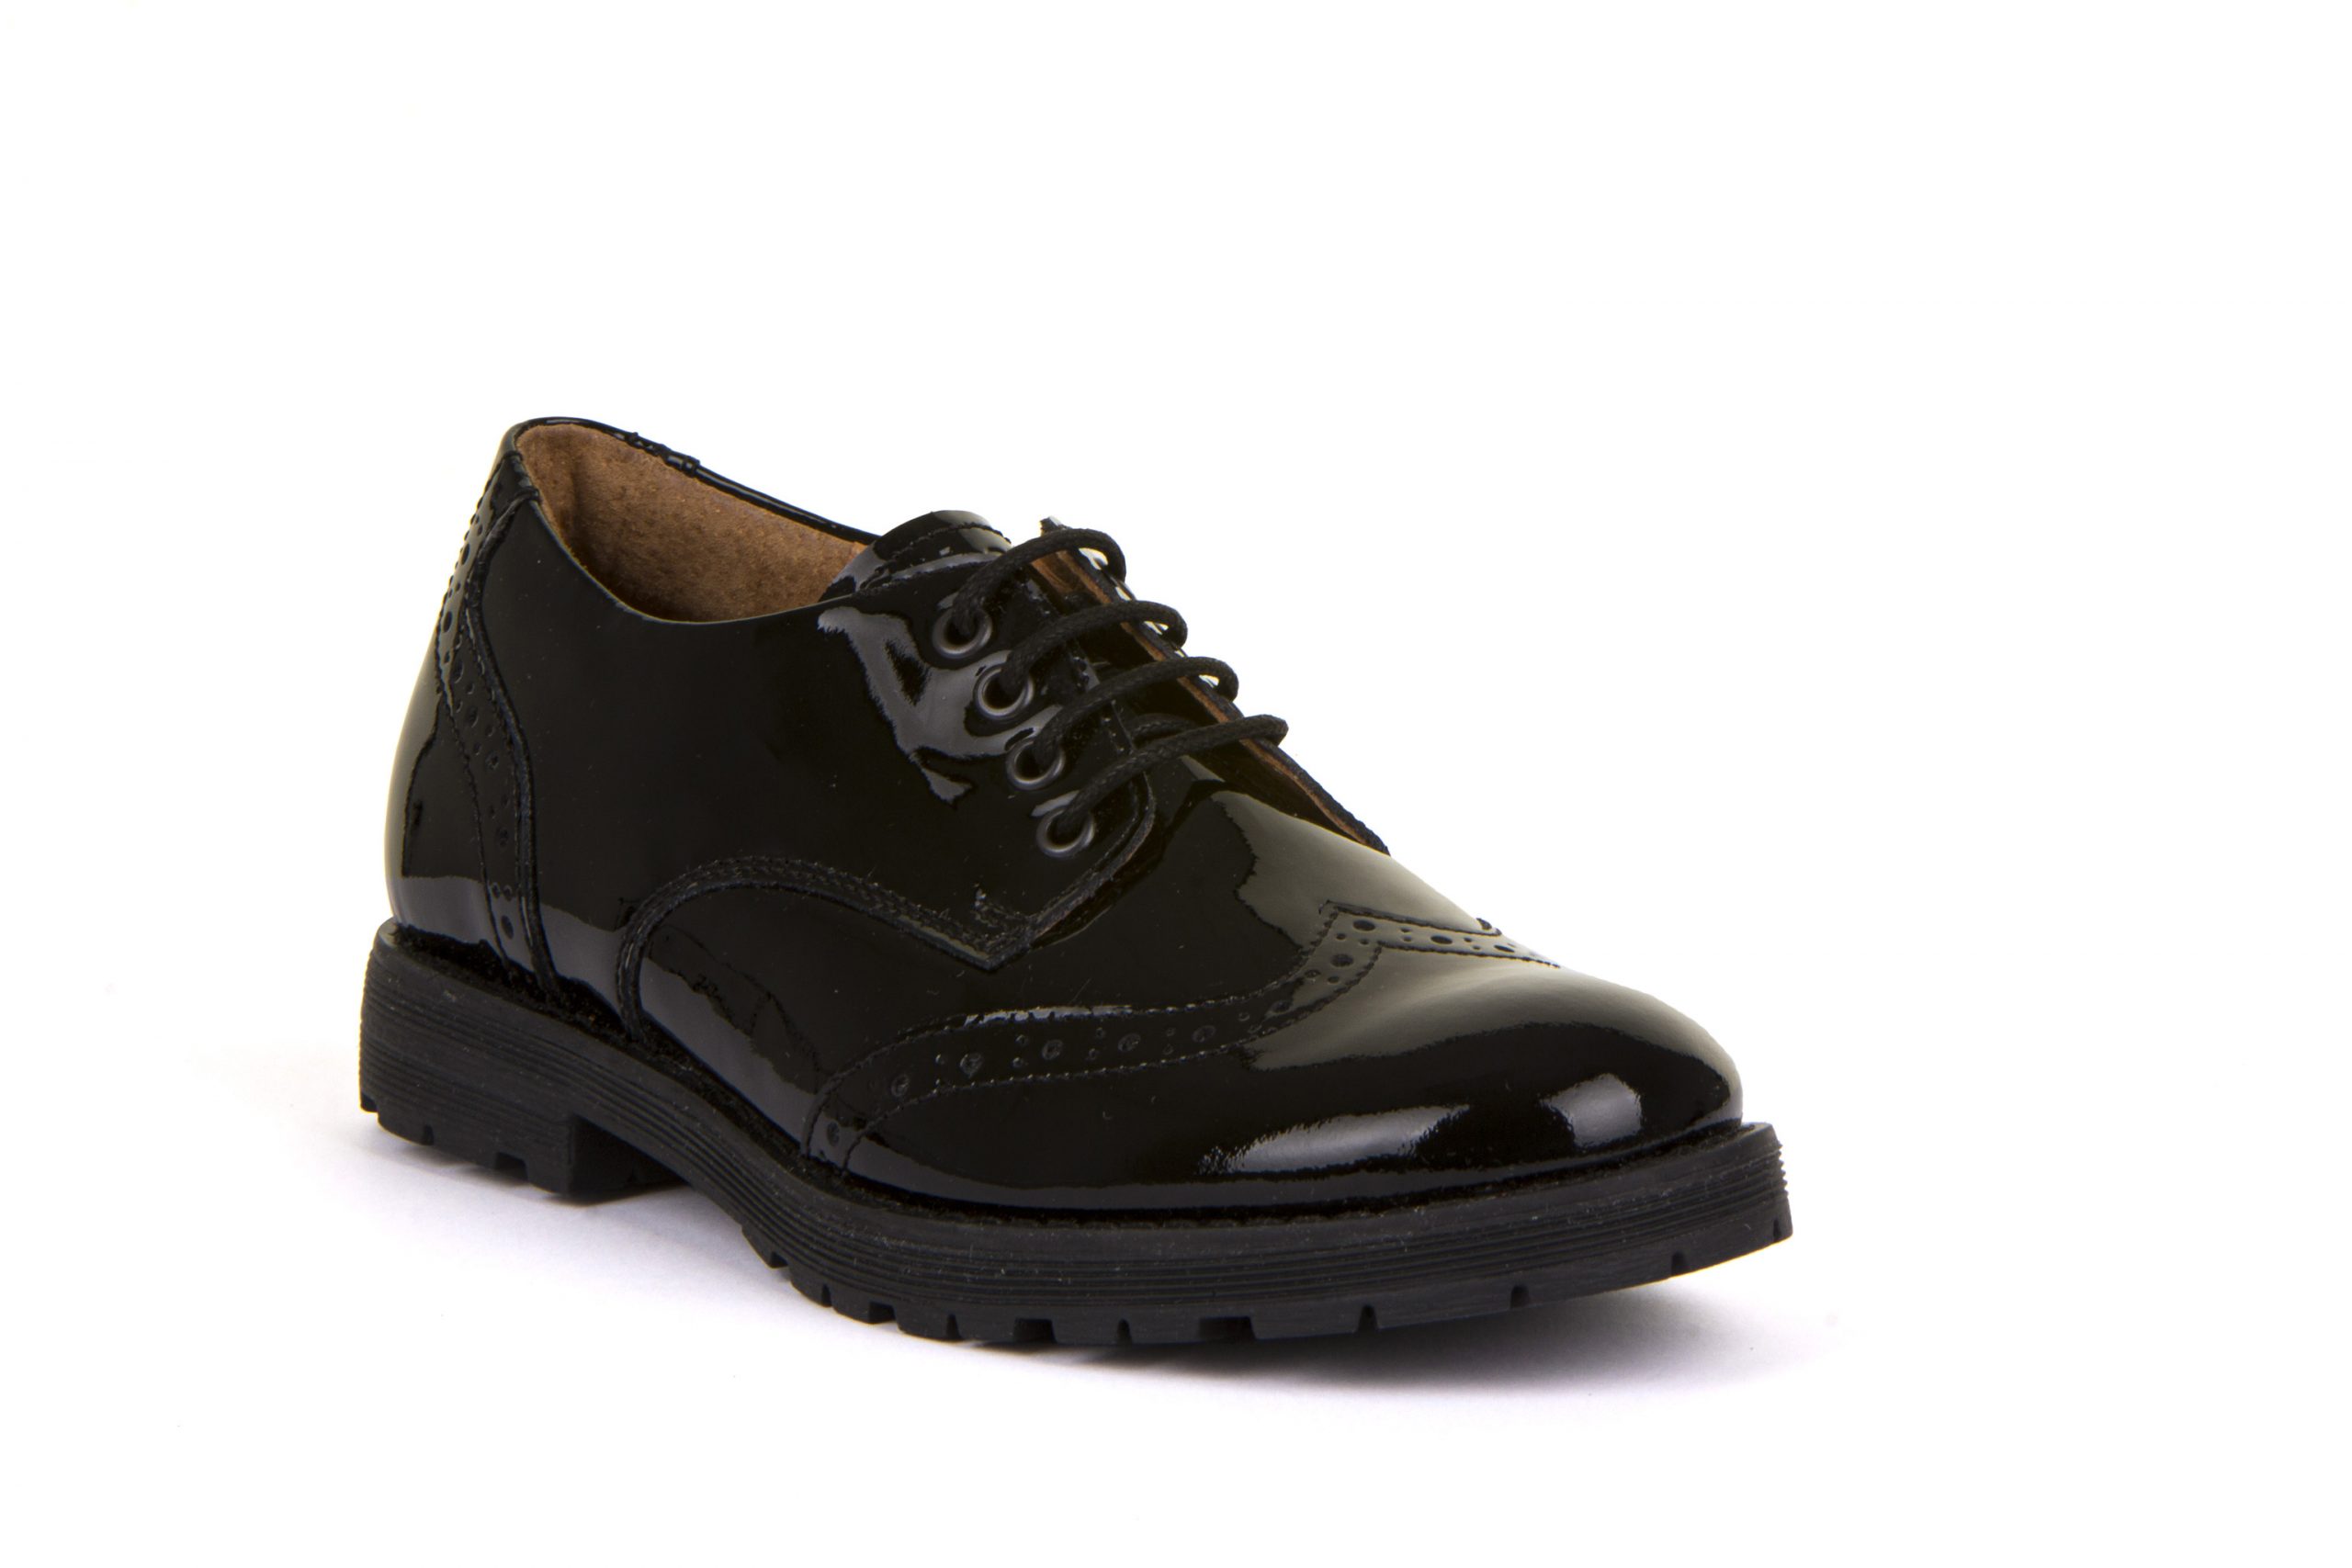 Froddo Charlie – G4130079-1 Black Patent Leather Laced School Shoe ...